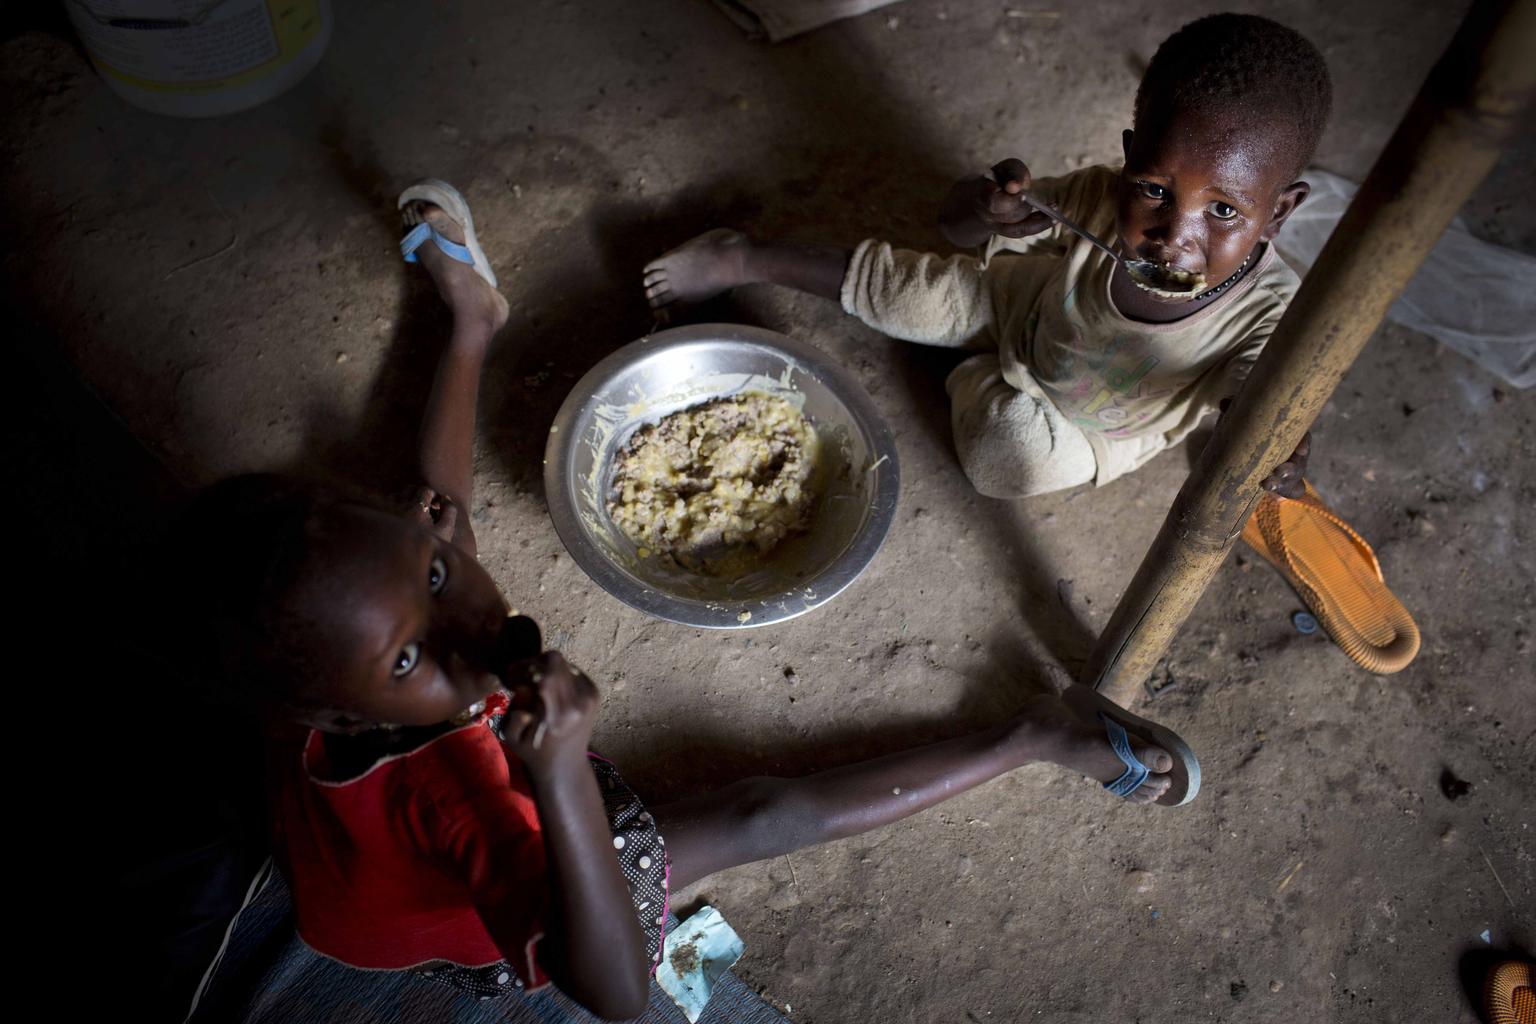 Children displaced by recent fighting eat their daily meal at a displacement site in Juba. © UNICEF/NYHQ2014-0344/Kate Holt